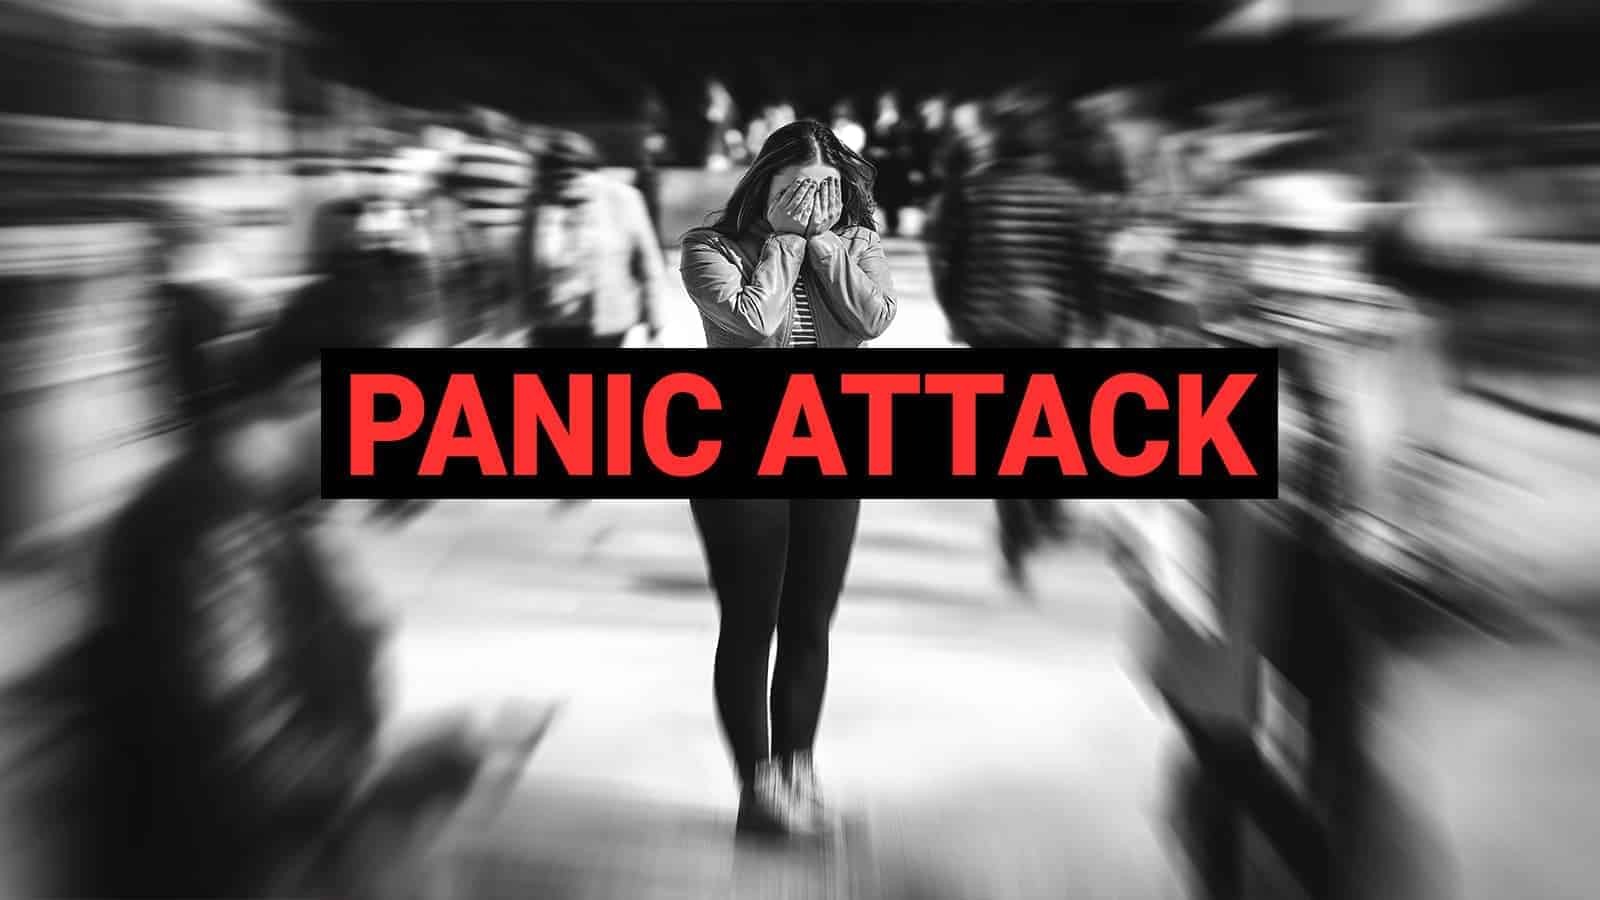 Researchers Reveal 8 Vitamin Deficiencies Linked to Panic Attacks